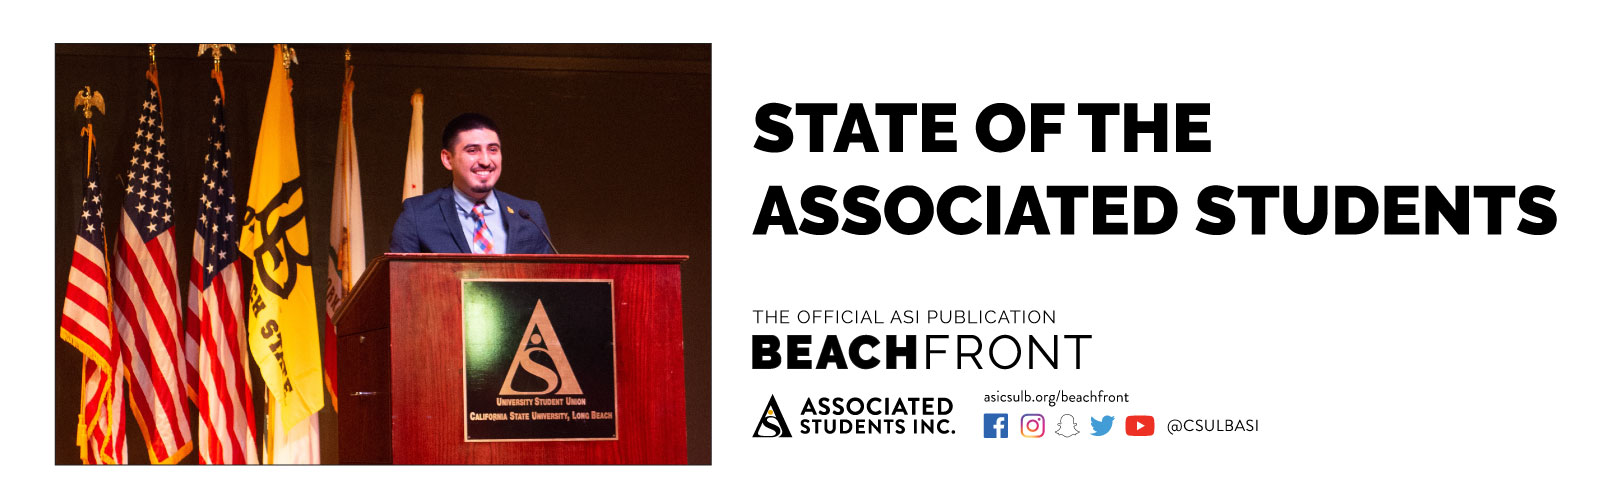 Graphic: State of the Associated Students